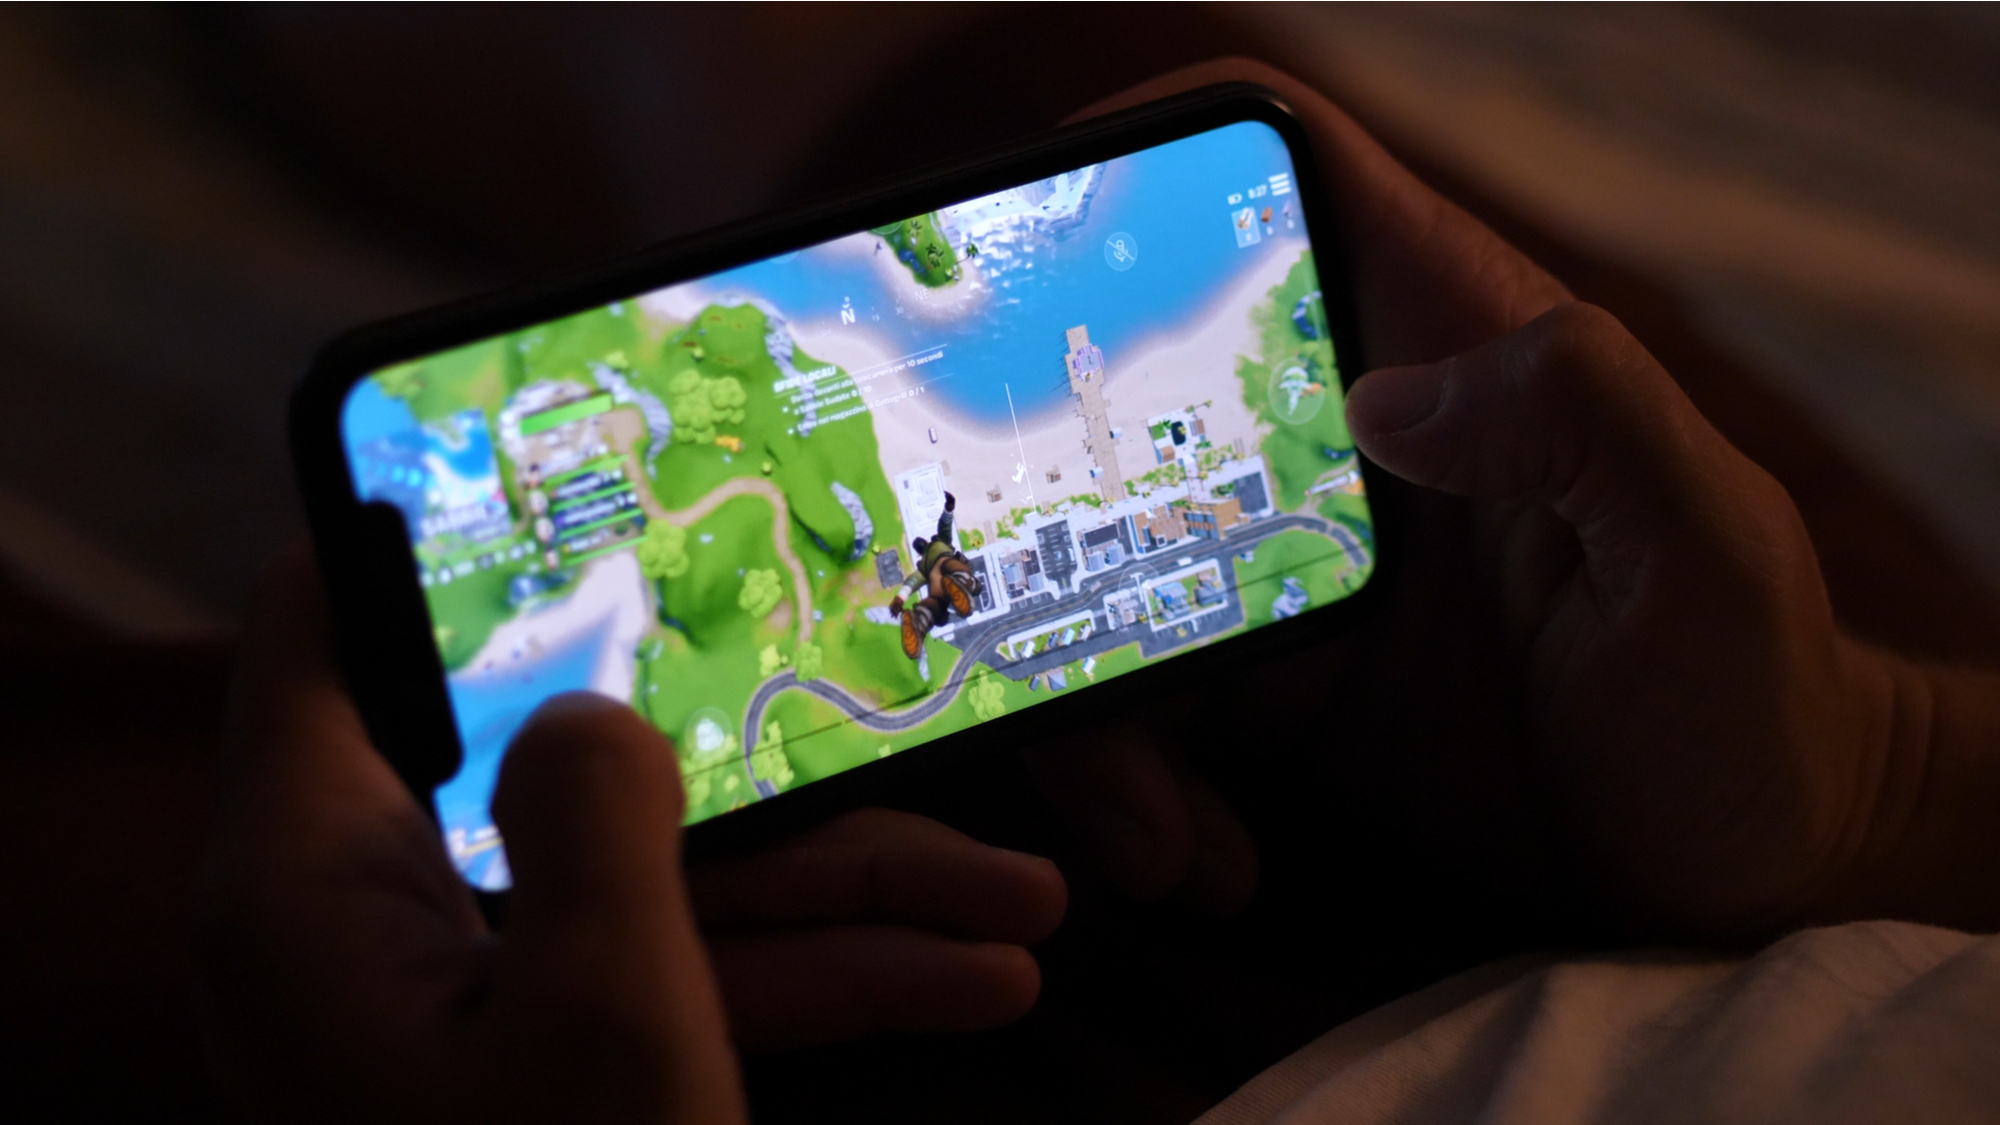 Epic v. Google: everything we're learning live in Fortnite court - The Verge